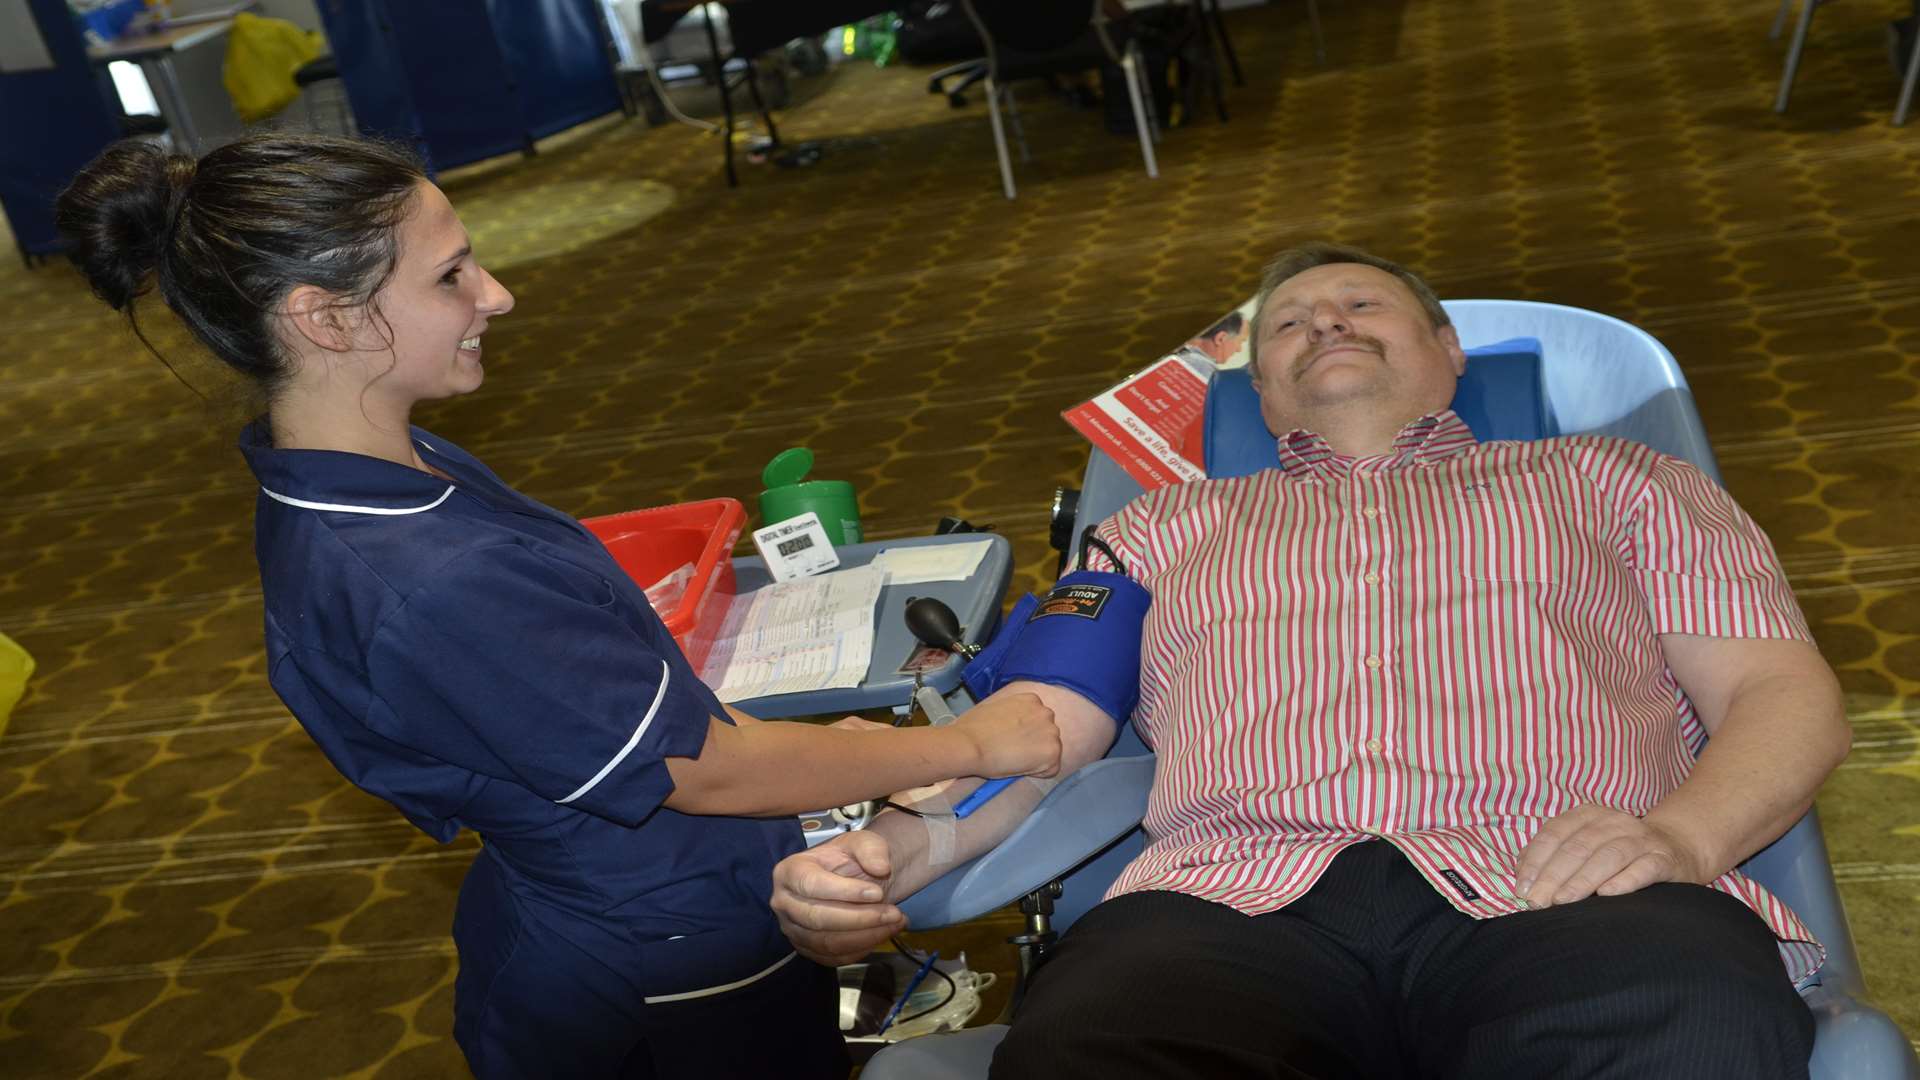 Andrezej Rygielski giving blood as part of a solidarity campaign